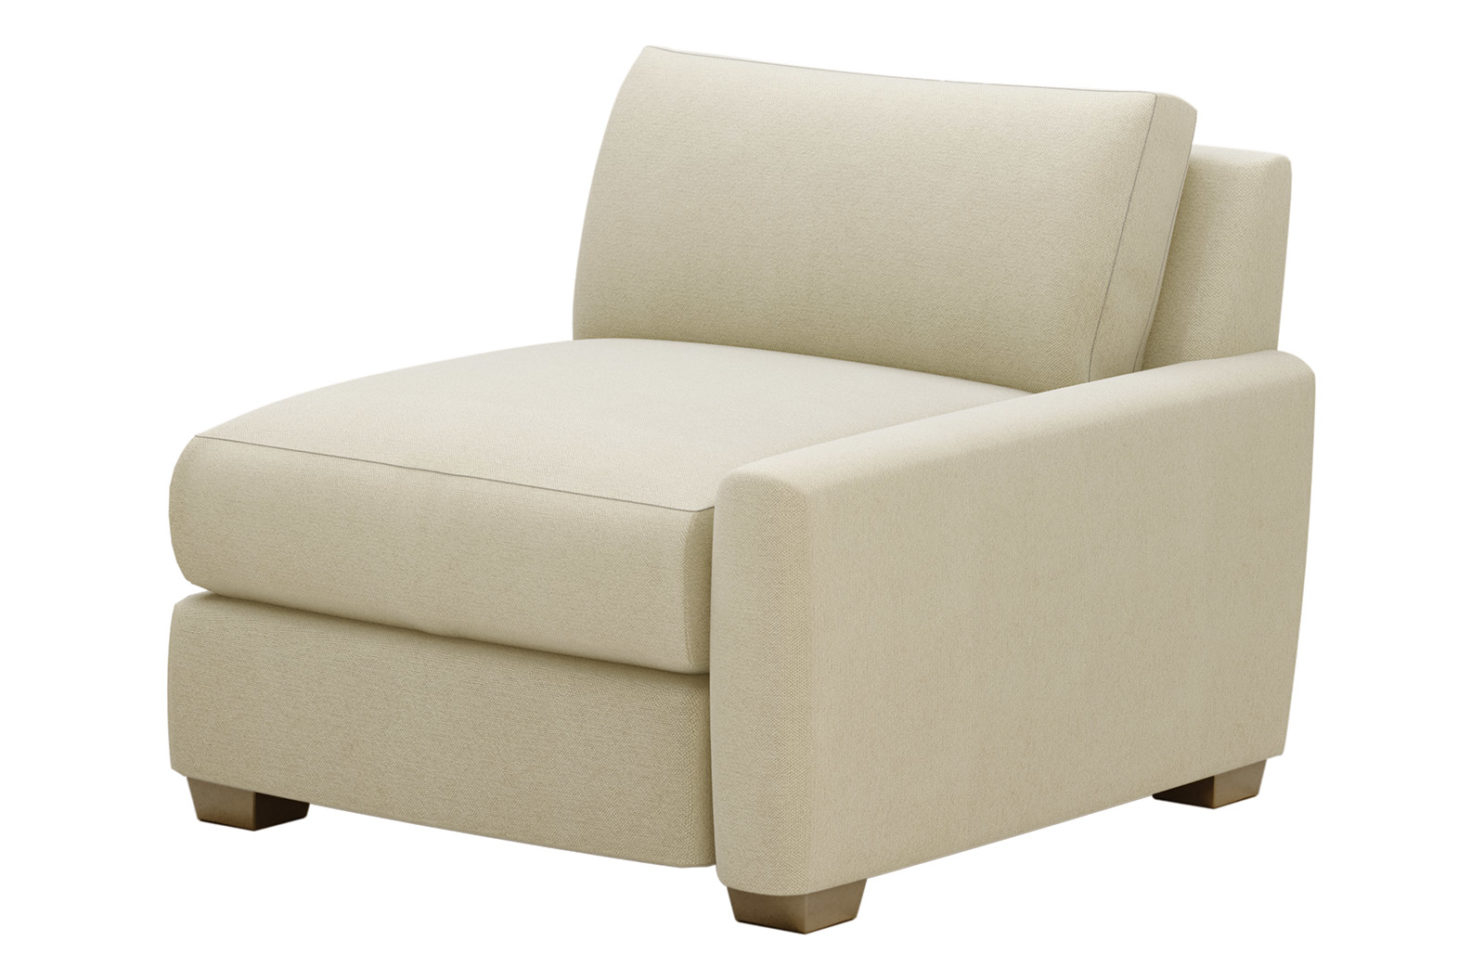 Seasonal Living Fizz Imperial Spritz One Armchair – Right Arm Facing